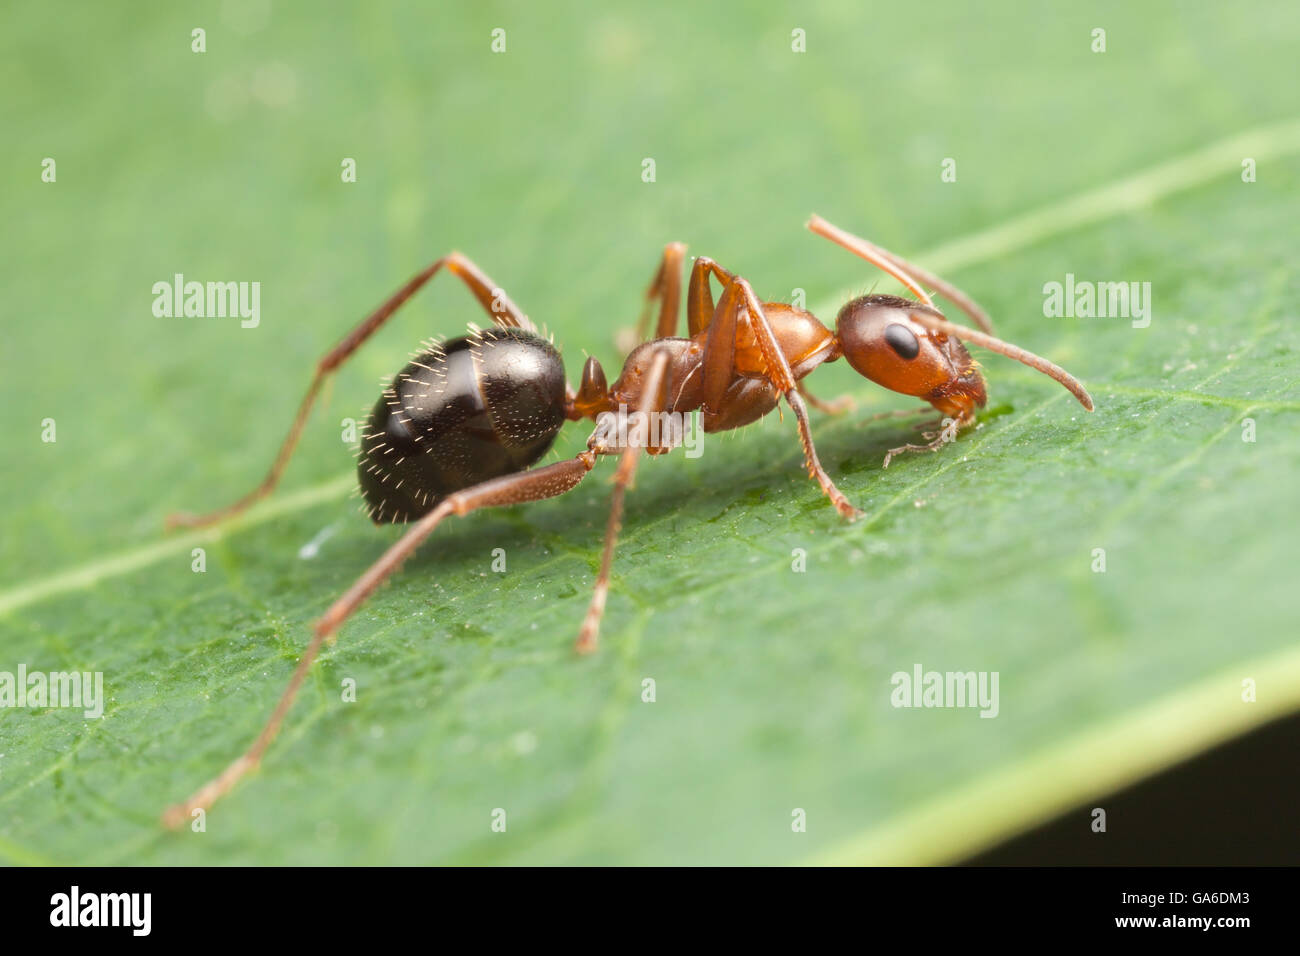 A Formicine Ant (Formica incerta) forages on a leaf. Stock Photo